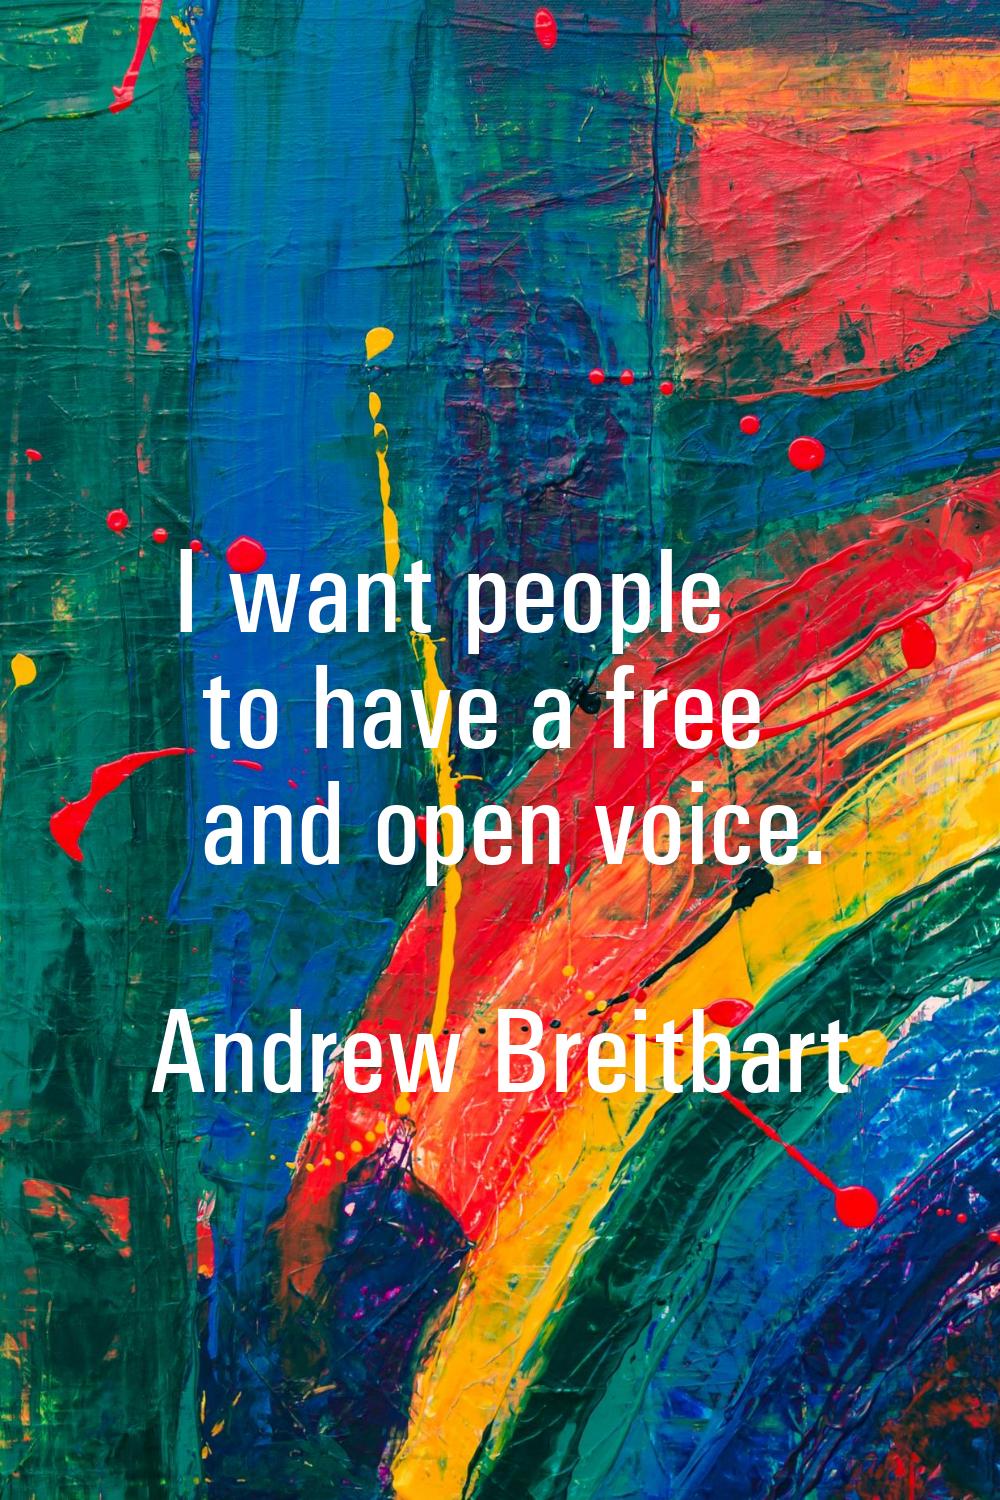 I want people to have a free and open voice.